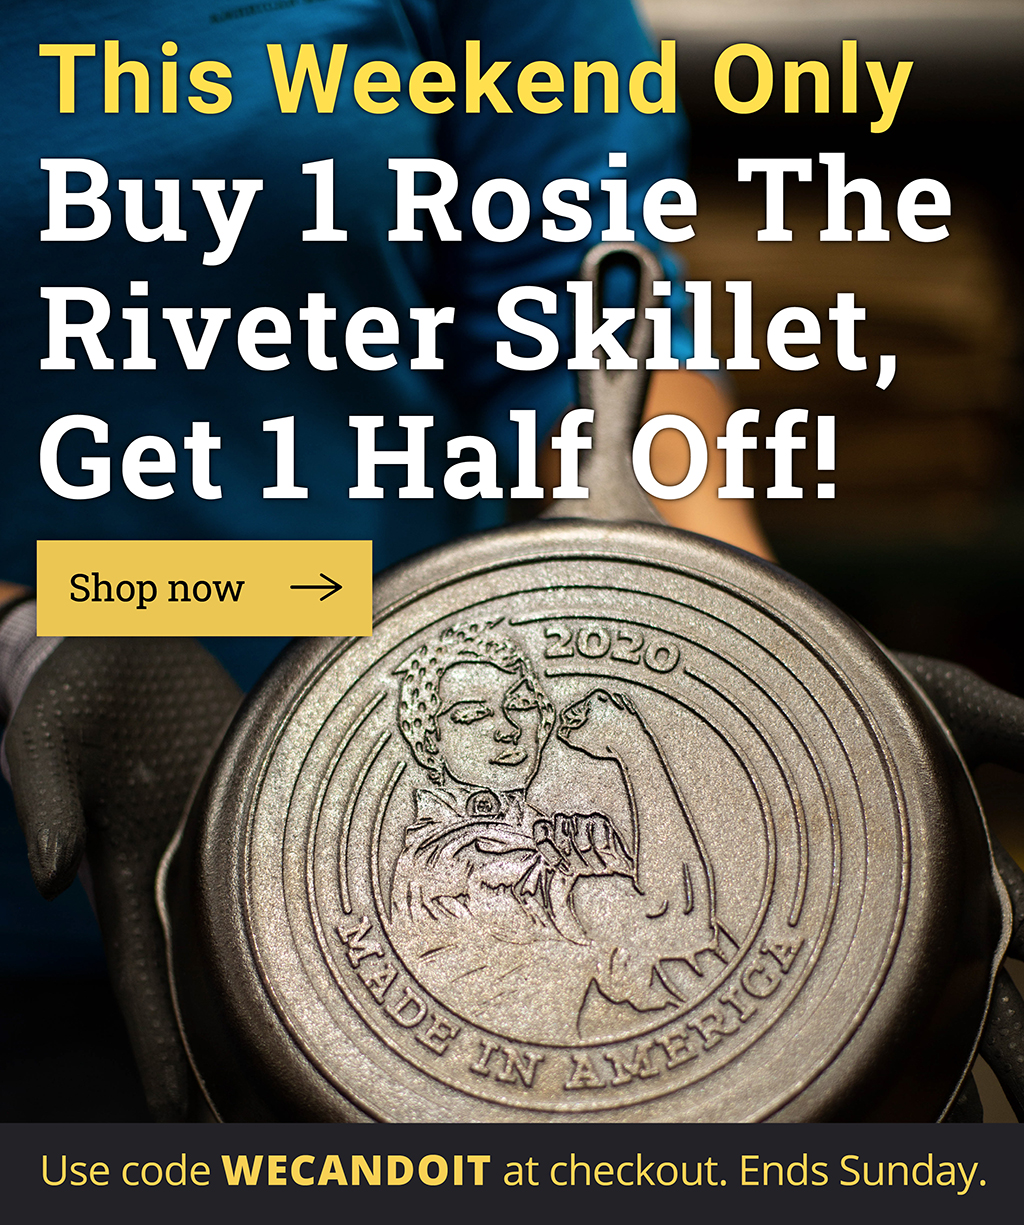 Buy 1 Rosie the Riveter Skillet, get 1 half off!  Use code WECANDOIT at checkout.  Ends May 10. The NEW 2020 Made in America Series(TM) design celebrates Lodge''s proud American manufacturing heritage.  Collect the 2020 skillet, featuring a Rosie the Riveter design today. 